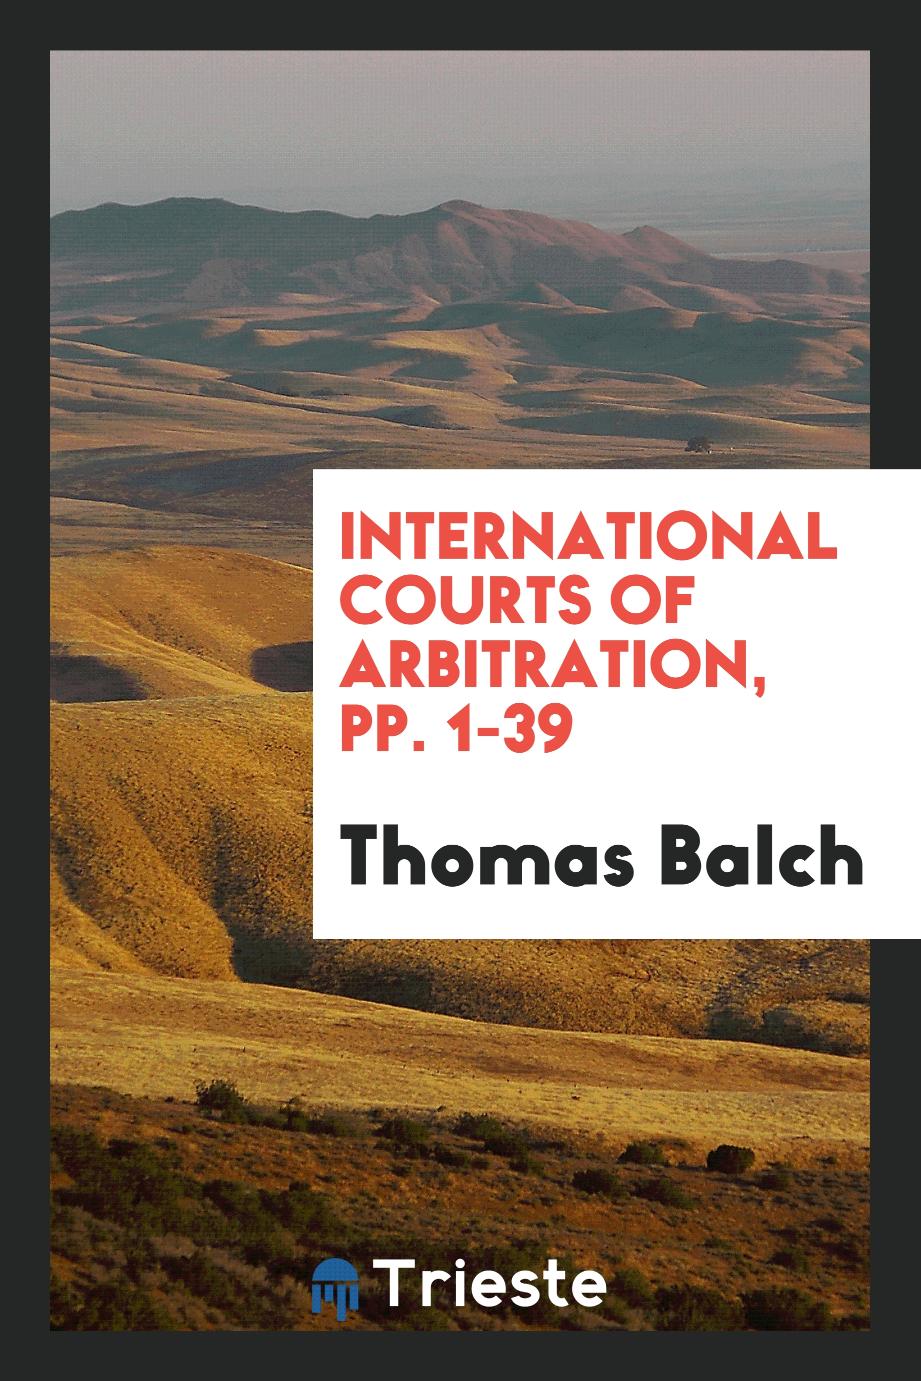 International Courts of Arbitration, pp. 1-39